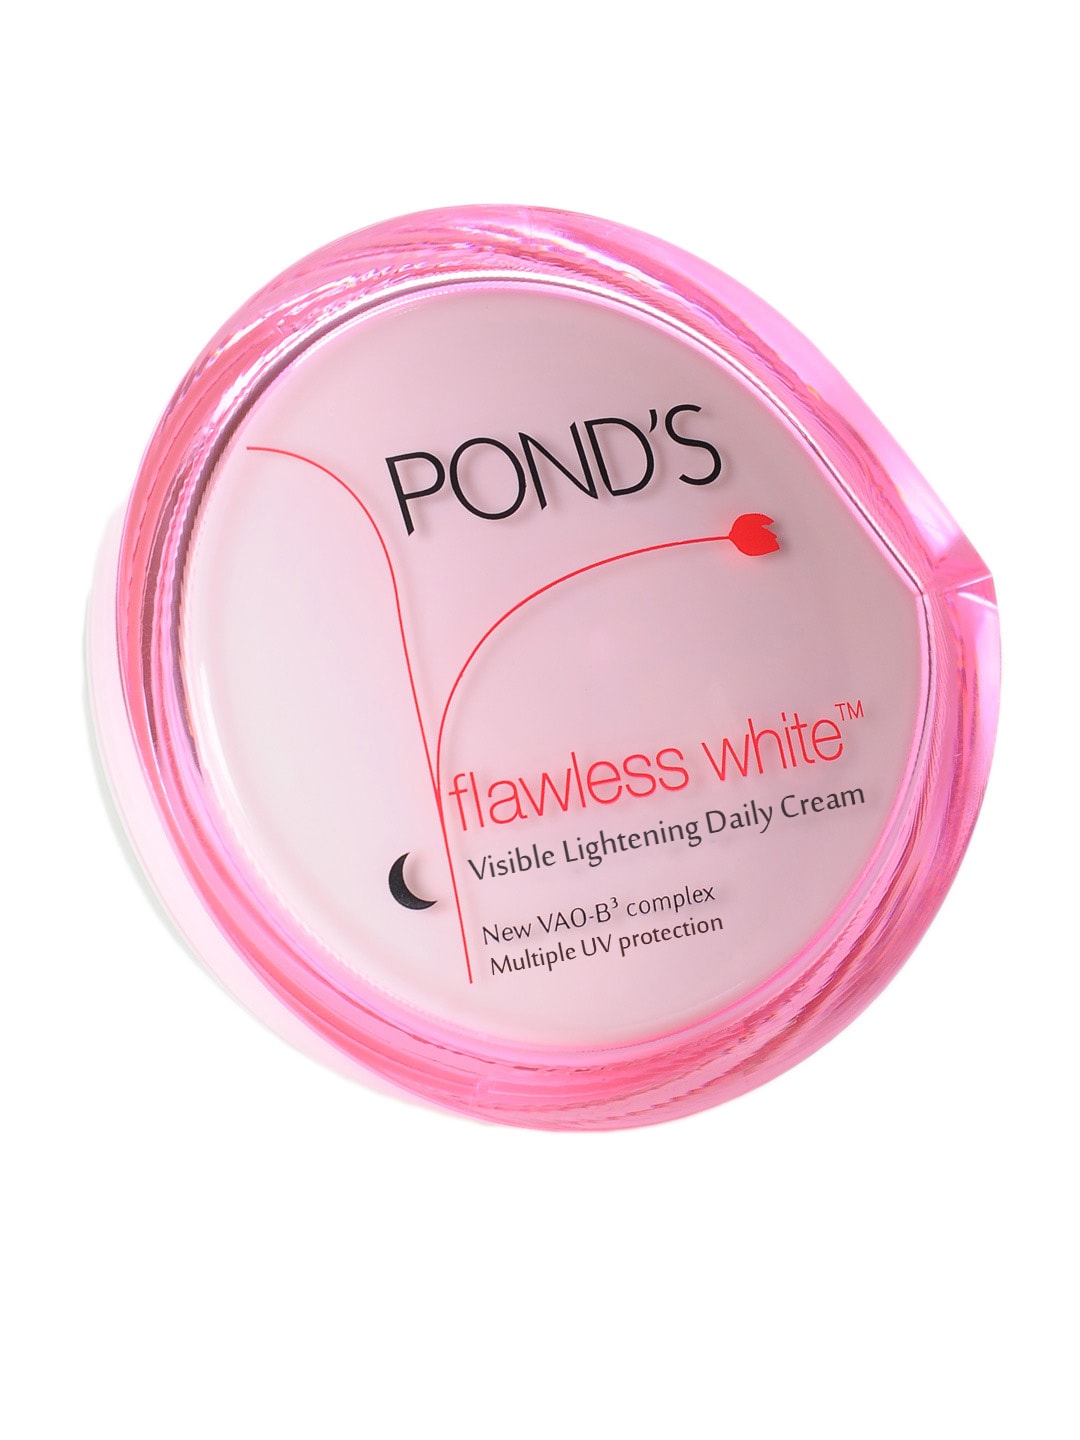 Pond's Flawless White Visible Lightening Daily Cream